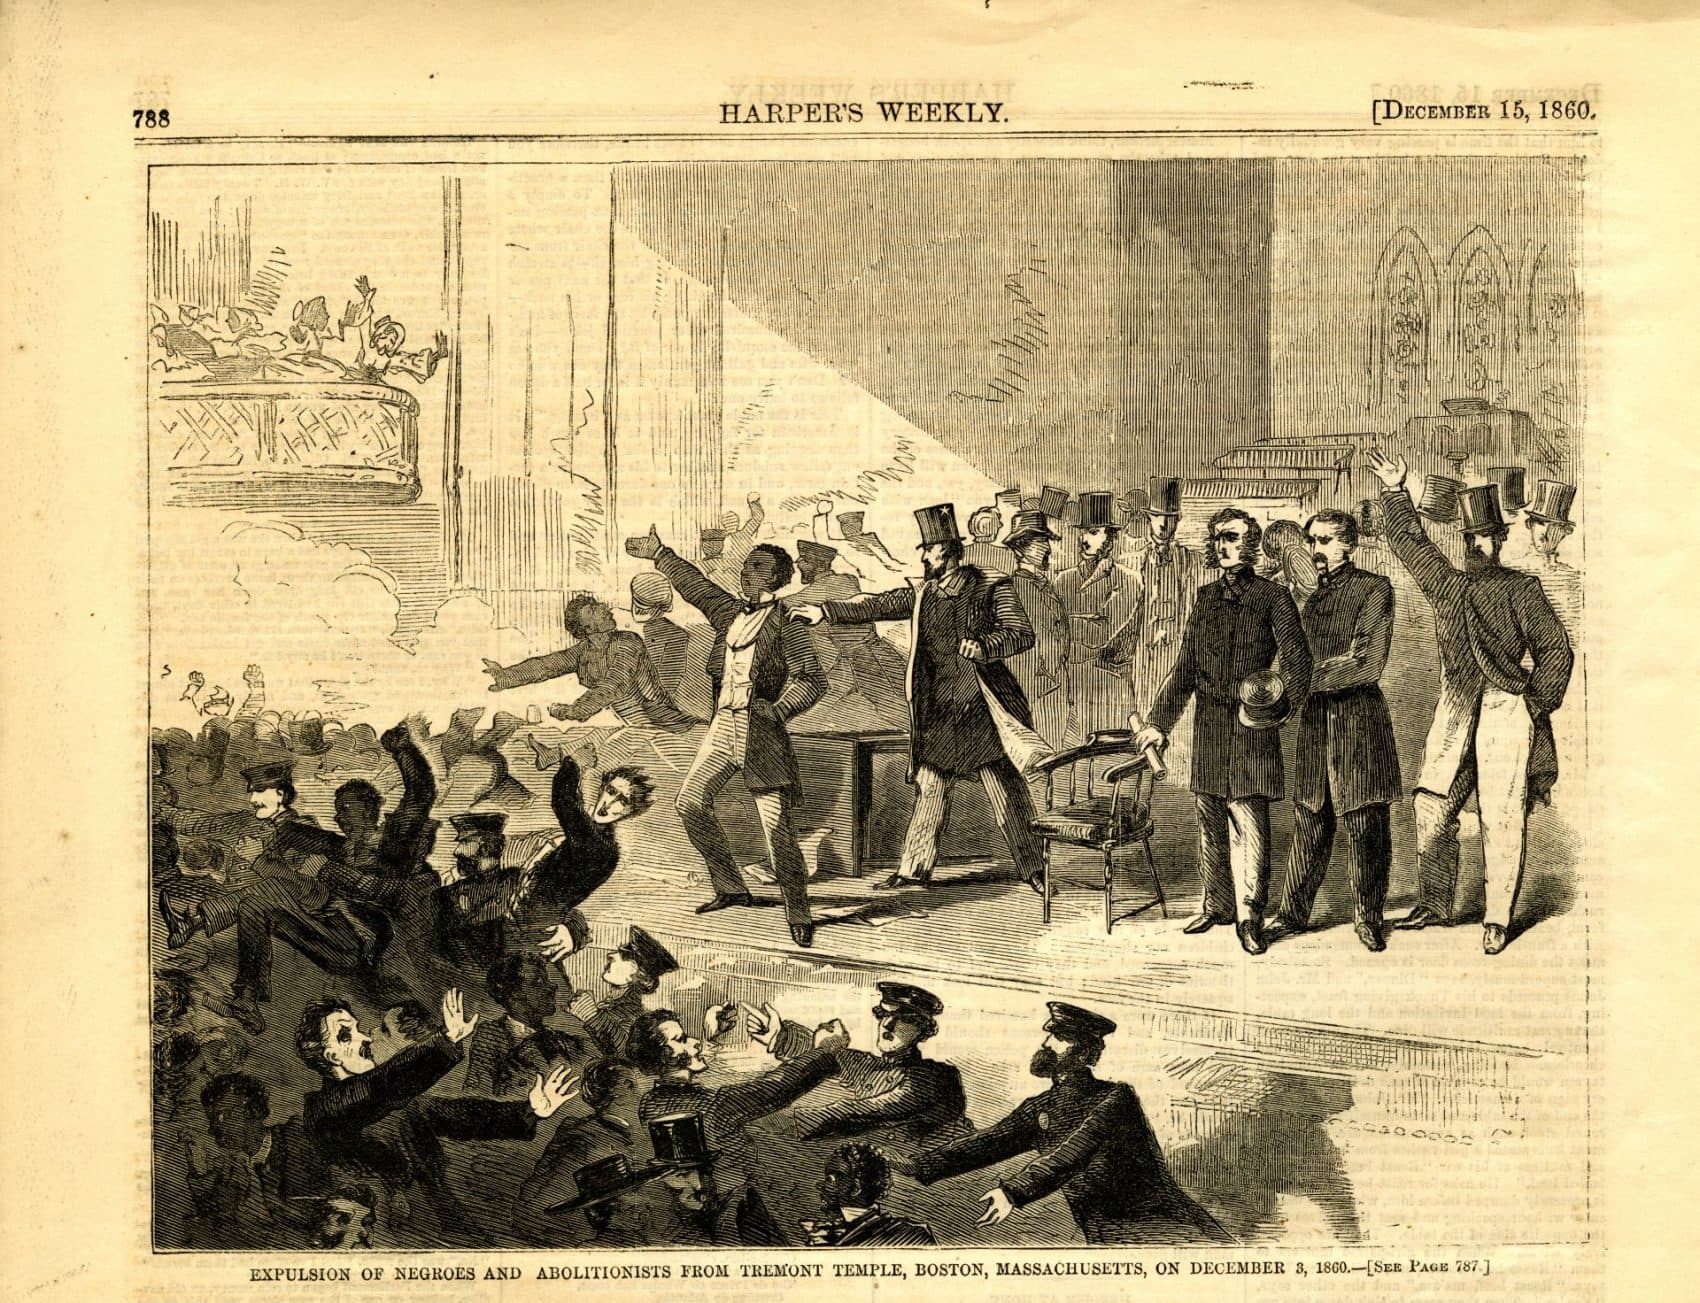 A clipping from Harper's Weekly depicting the expulsion of abolitionists from Tremont Temple in Boston in 1860. (Courtesy Museum of African American History)